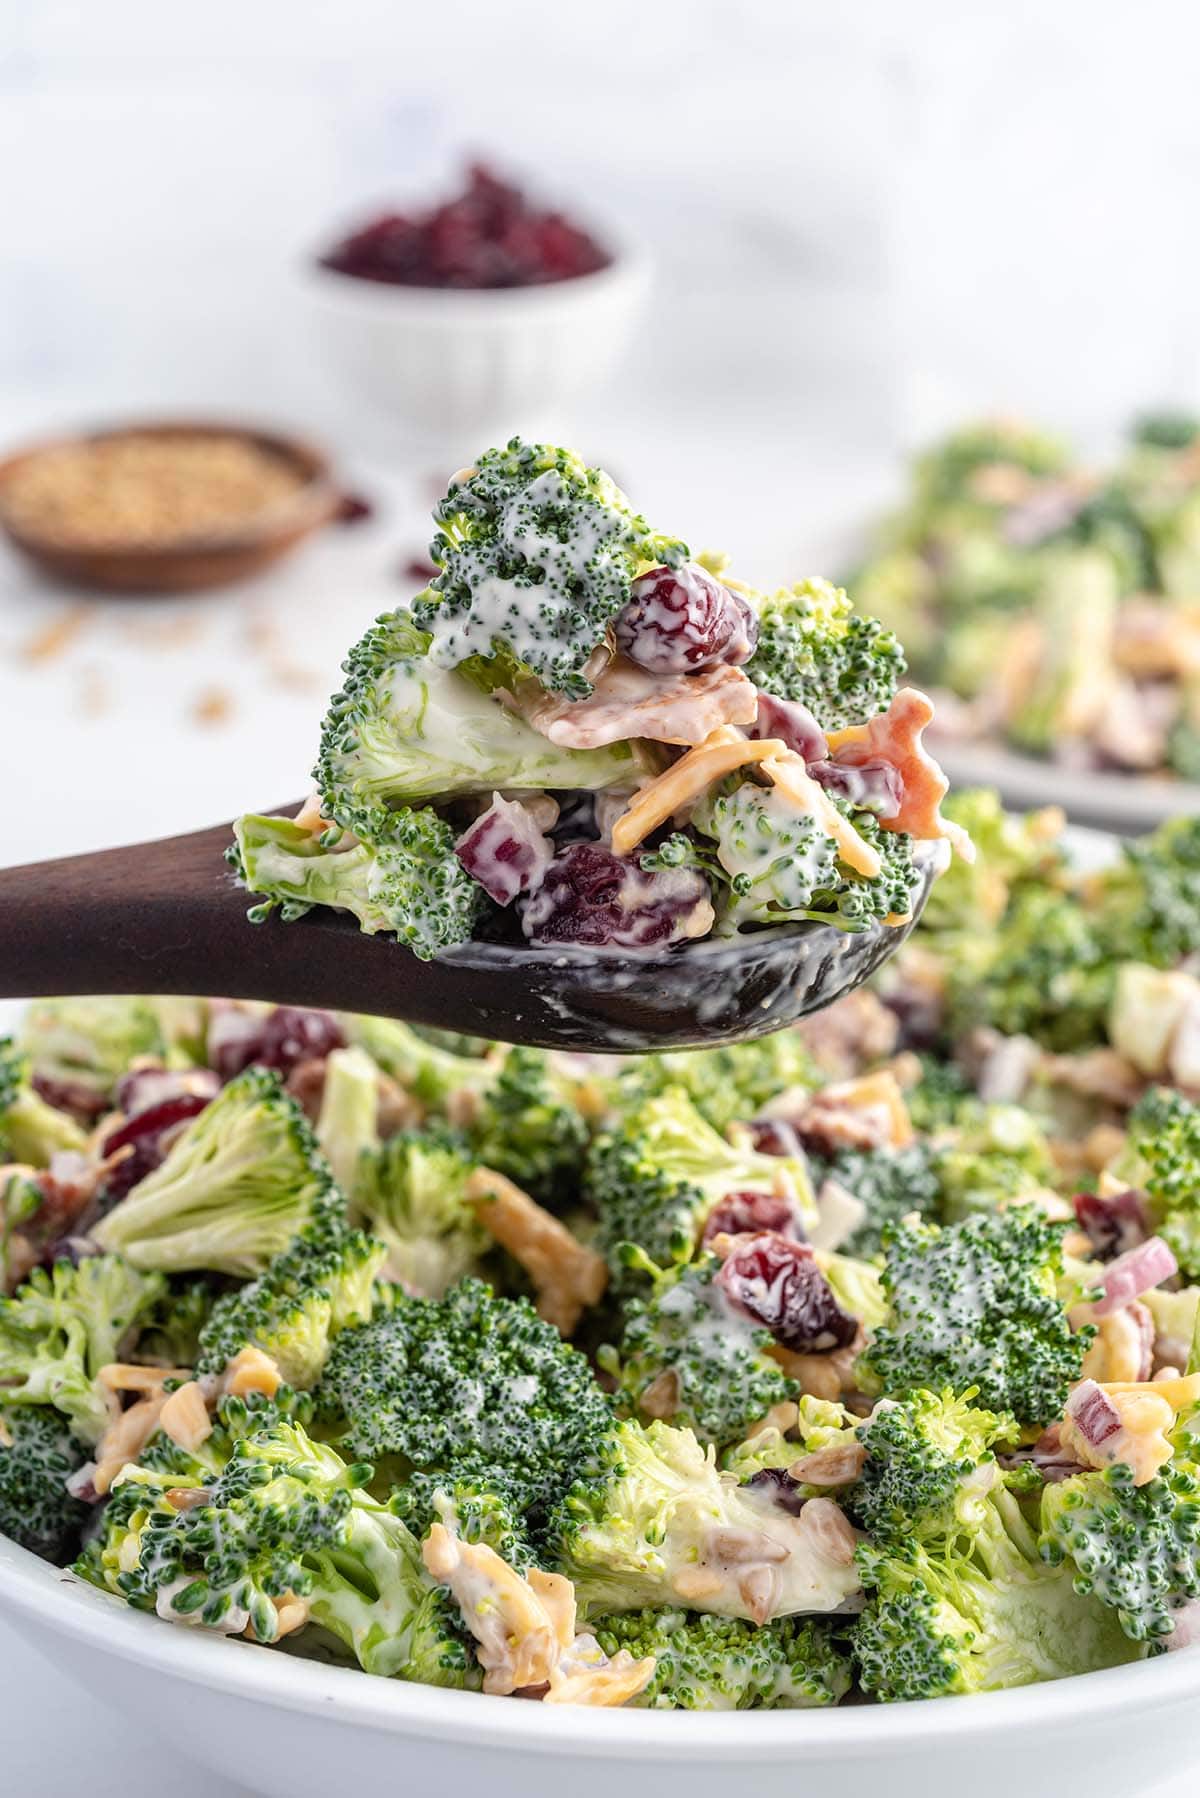 taking a spoonful of broccoli salad using wooden spoon.